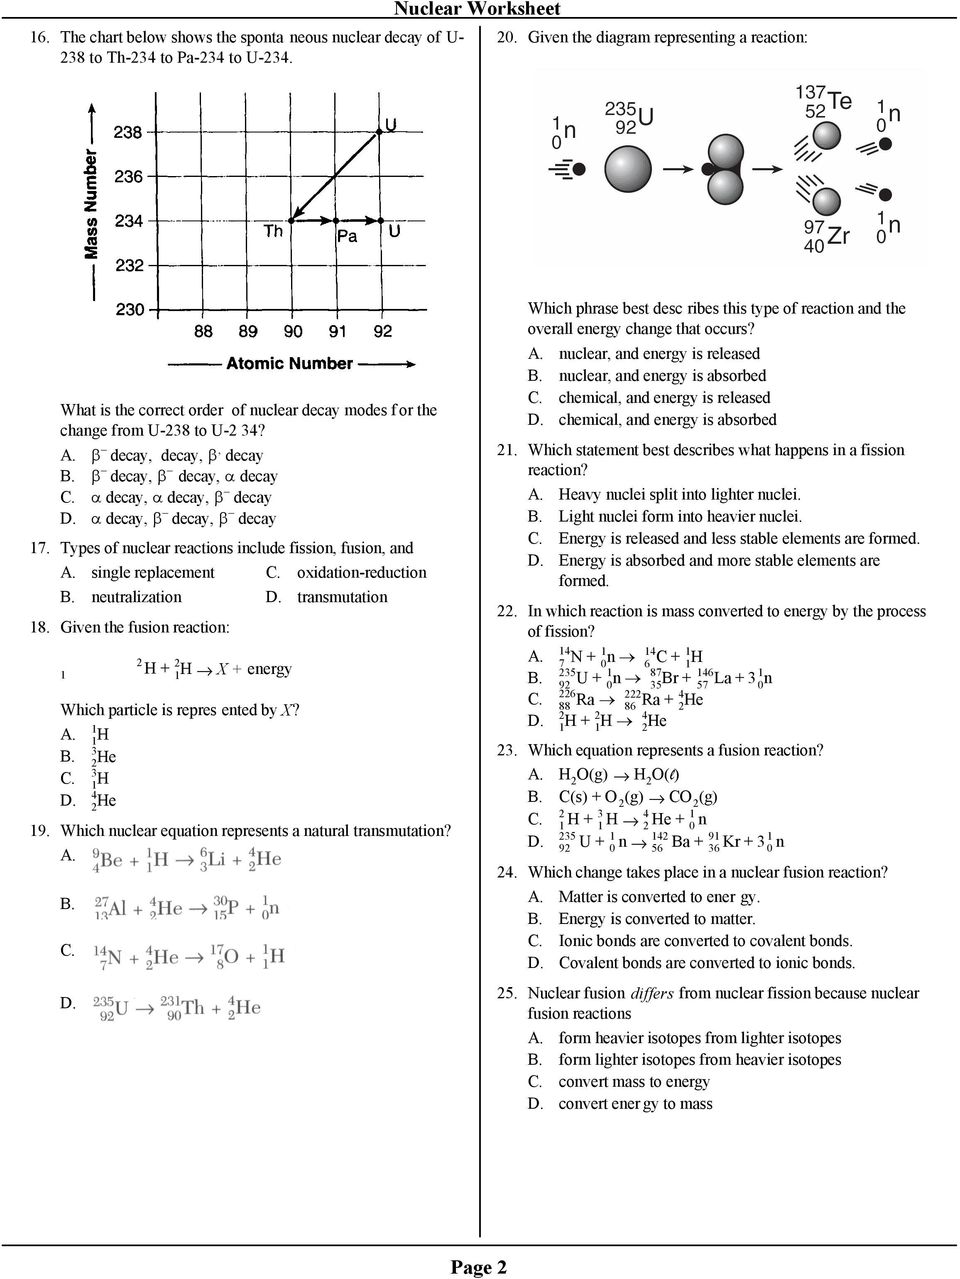 Regents Review Nuclear Worksheet Mr. Beauchamp - PDF Free Download Pertaining To Nuclear Decay Worksheet Answers